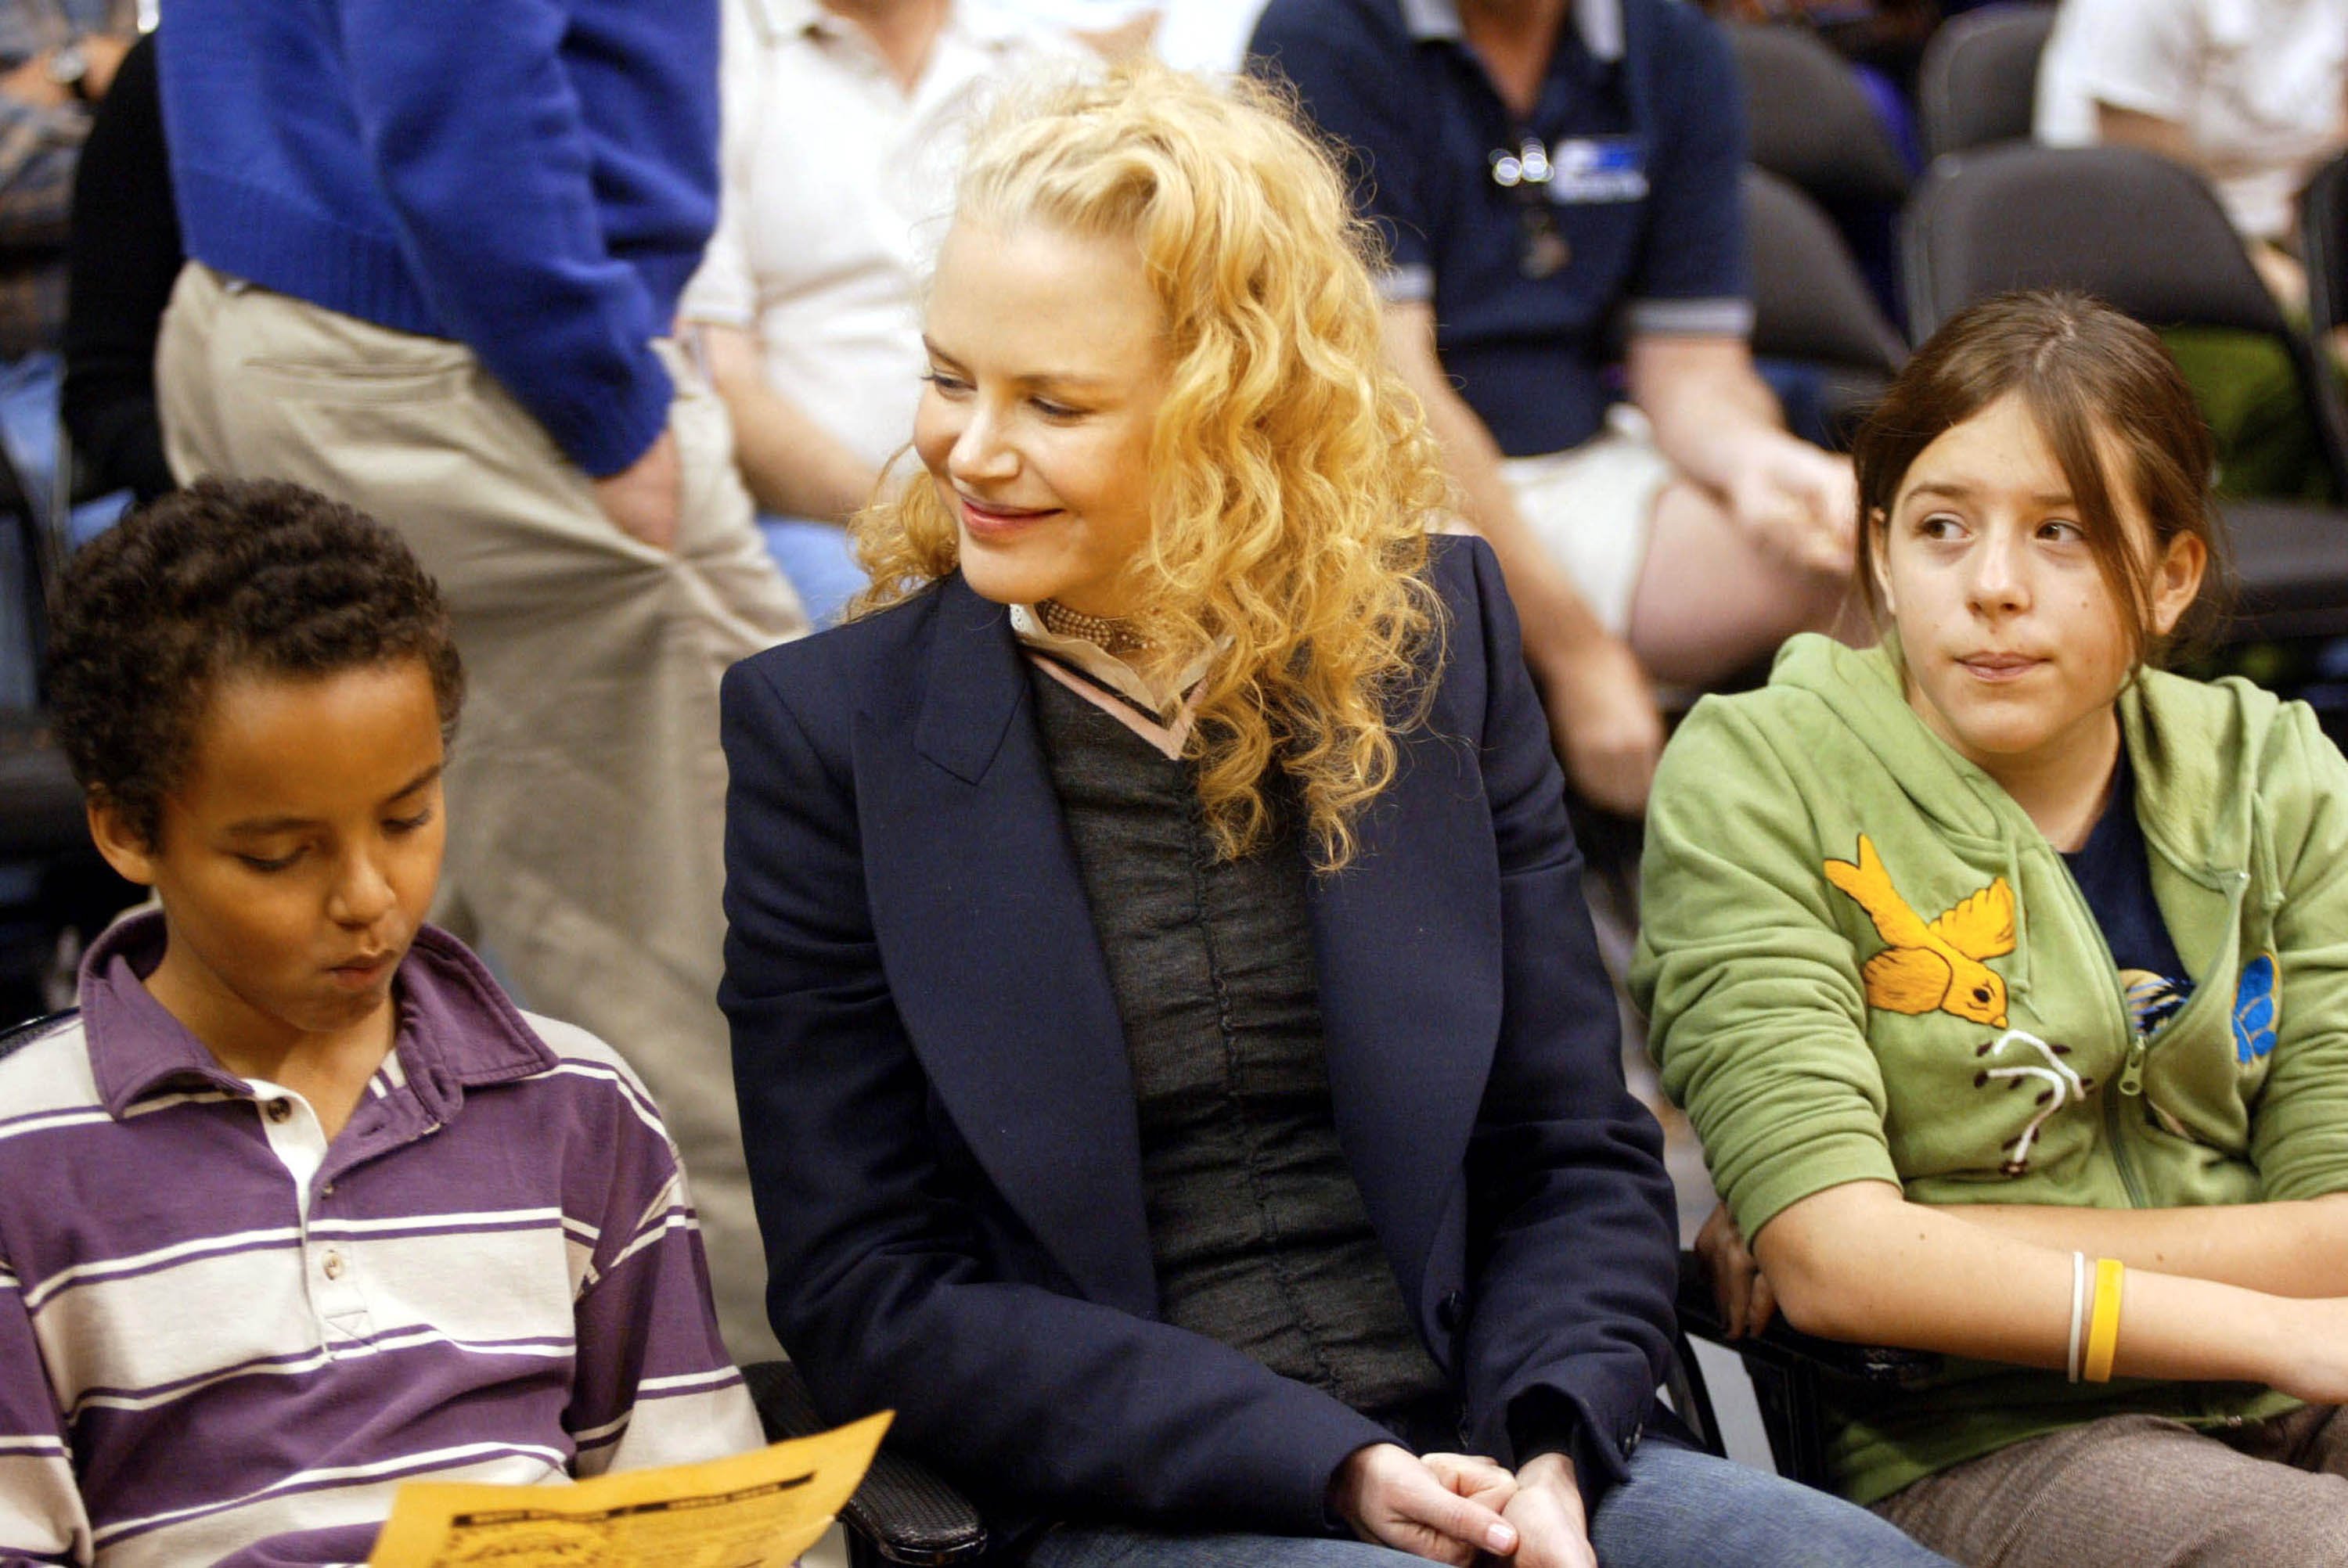 Nicole Kidman and her children Connor and Isabella at a game between the Los Angeles Lakers and the Miami Heat on December 25, 2004, in Los Angeles | Source: Getty Images